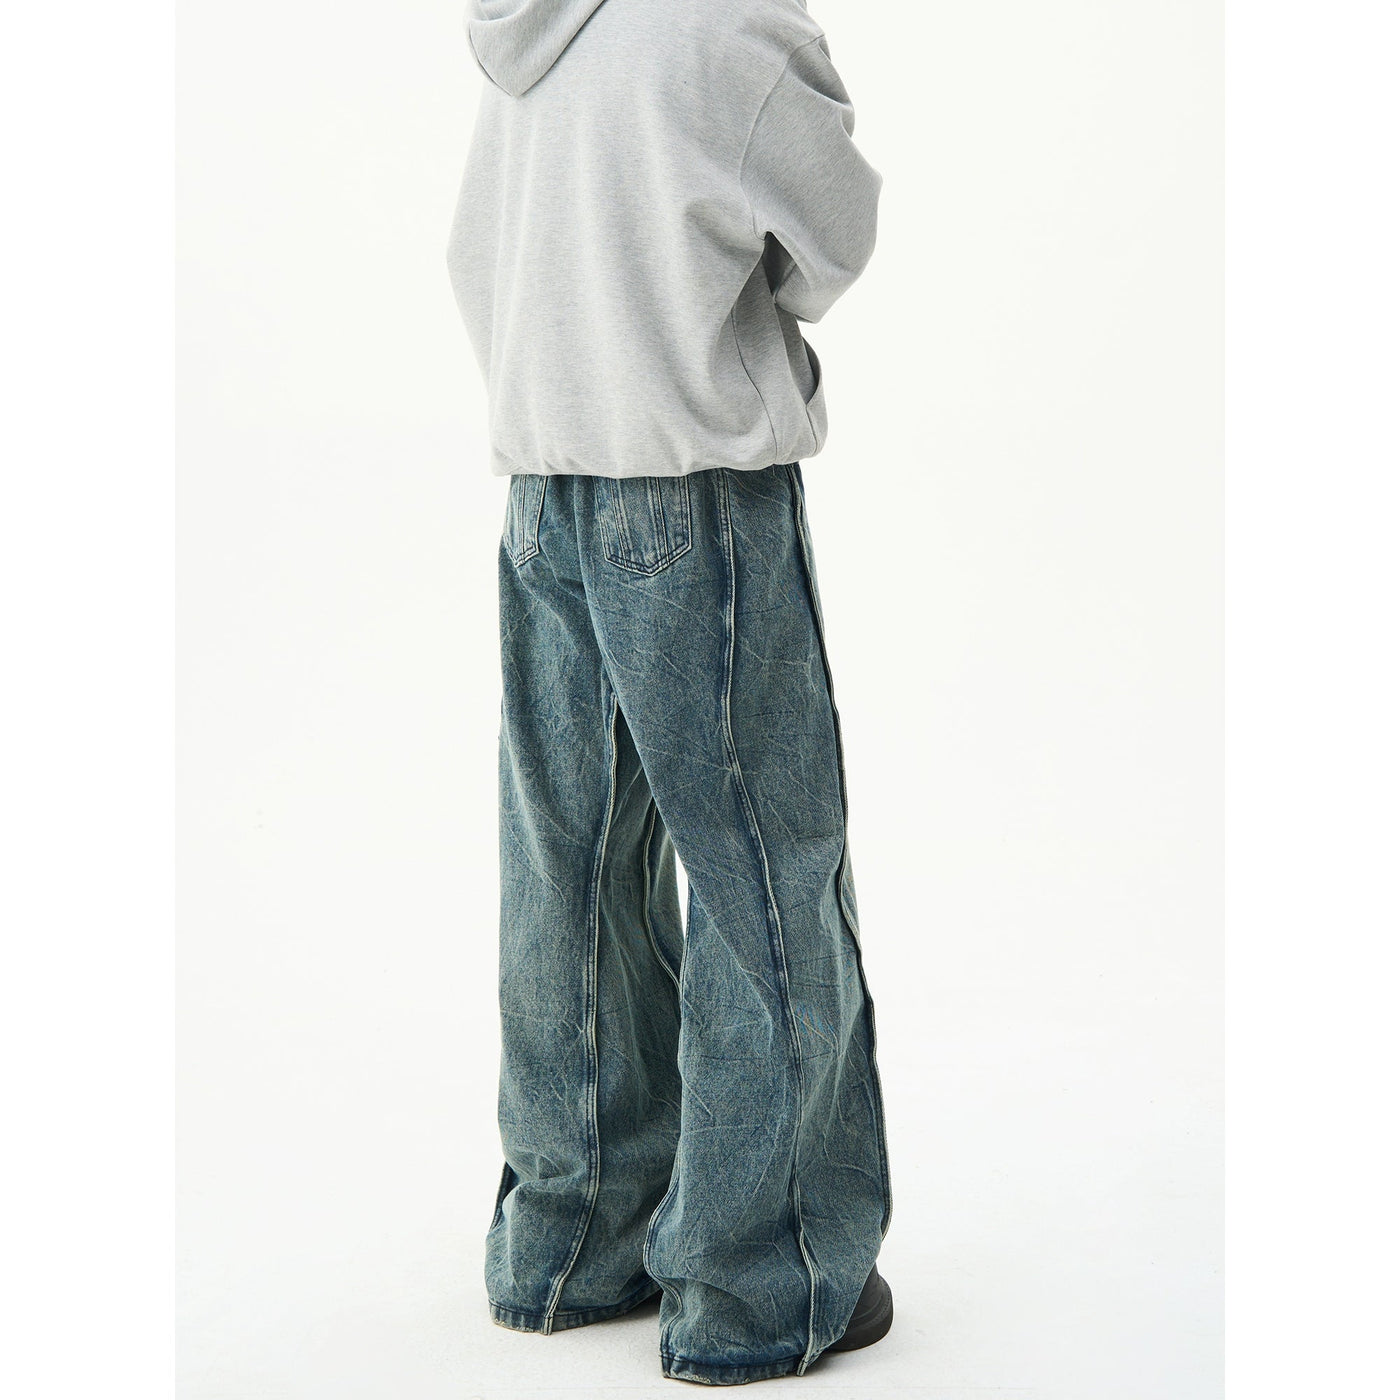 Faded Curved Pattern Jeans Korean Street Fashion Jeans By MaxDstr Shop Online at OH Vault